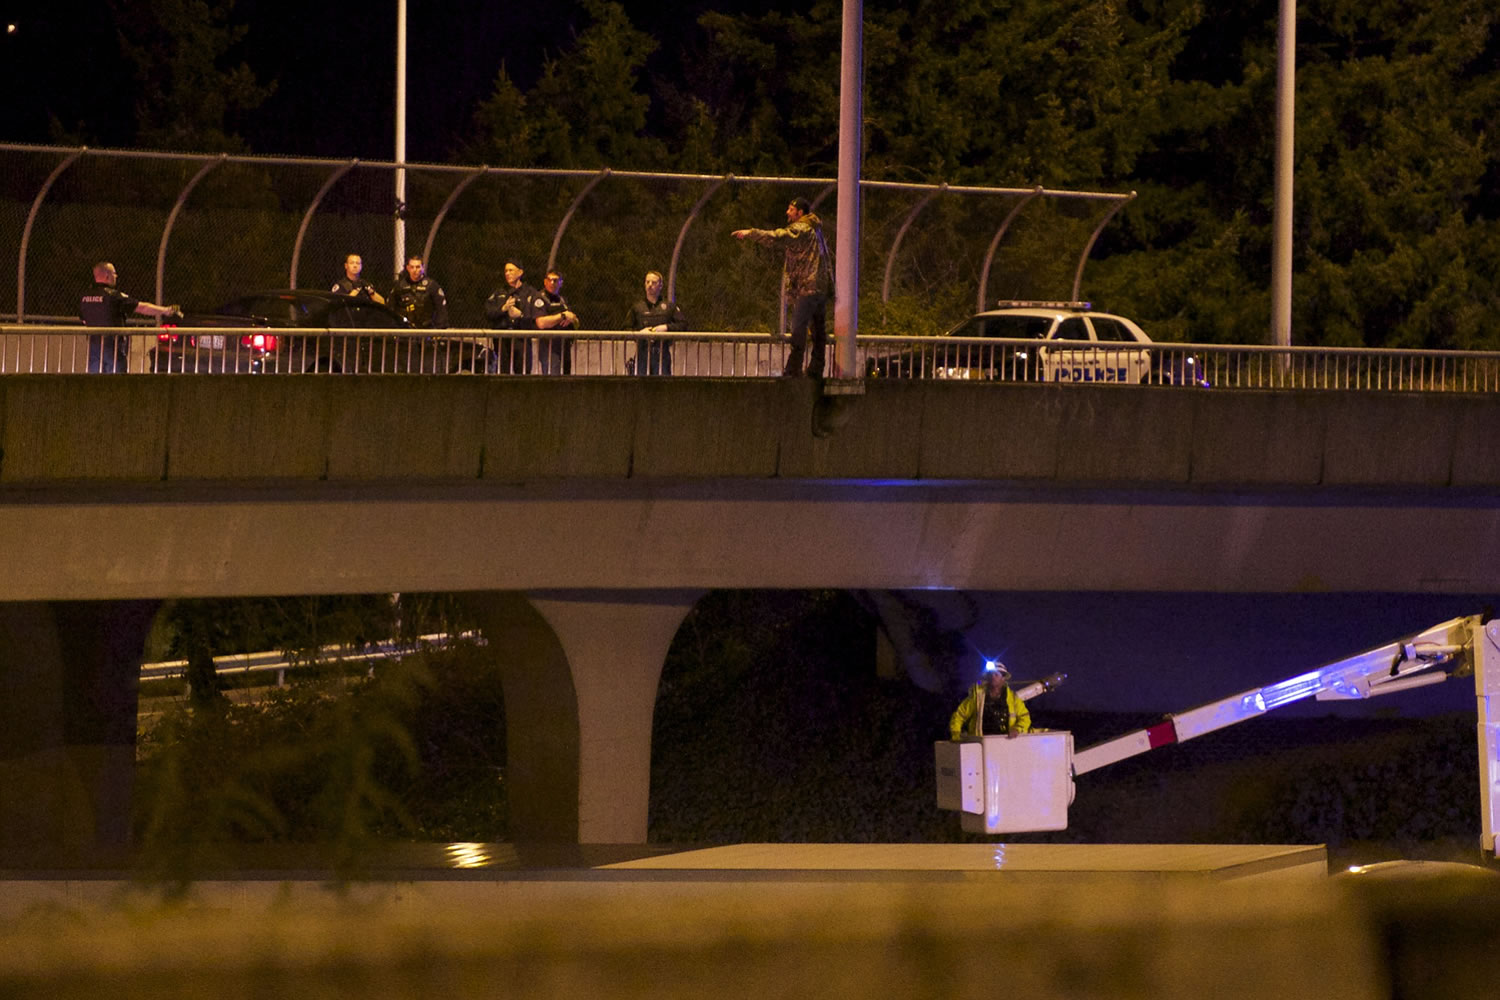 A suicidal man on the East 39th Street overpass prompts a massive I-5 shutdown Friday.